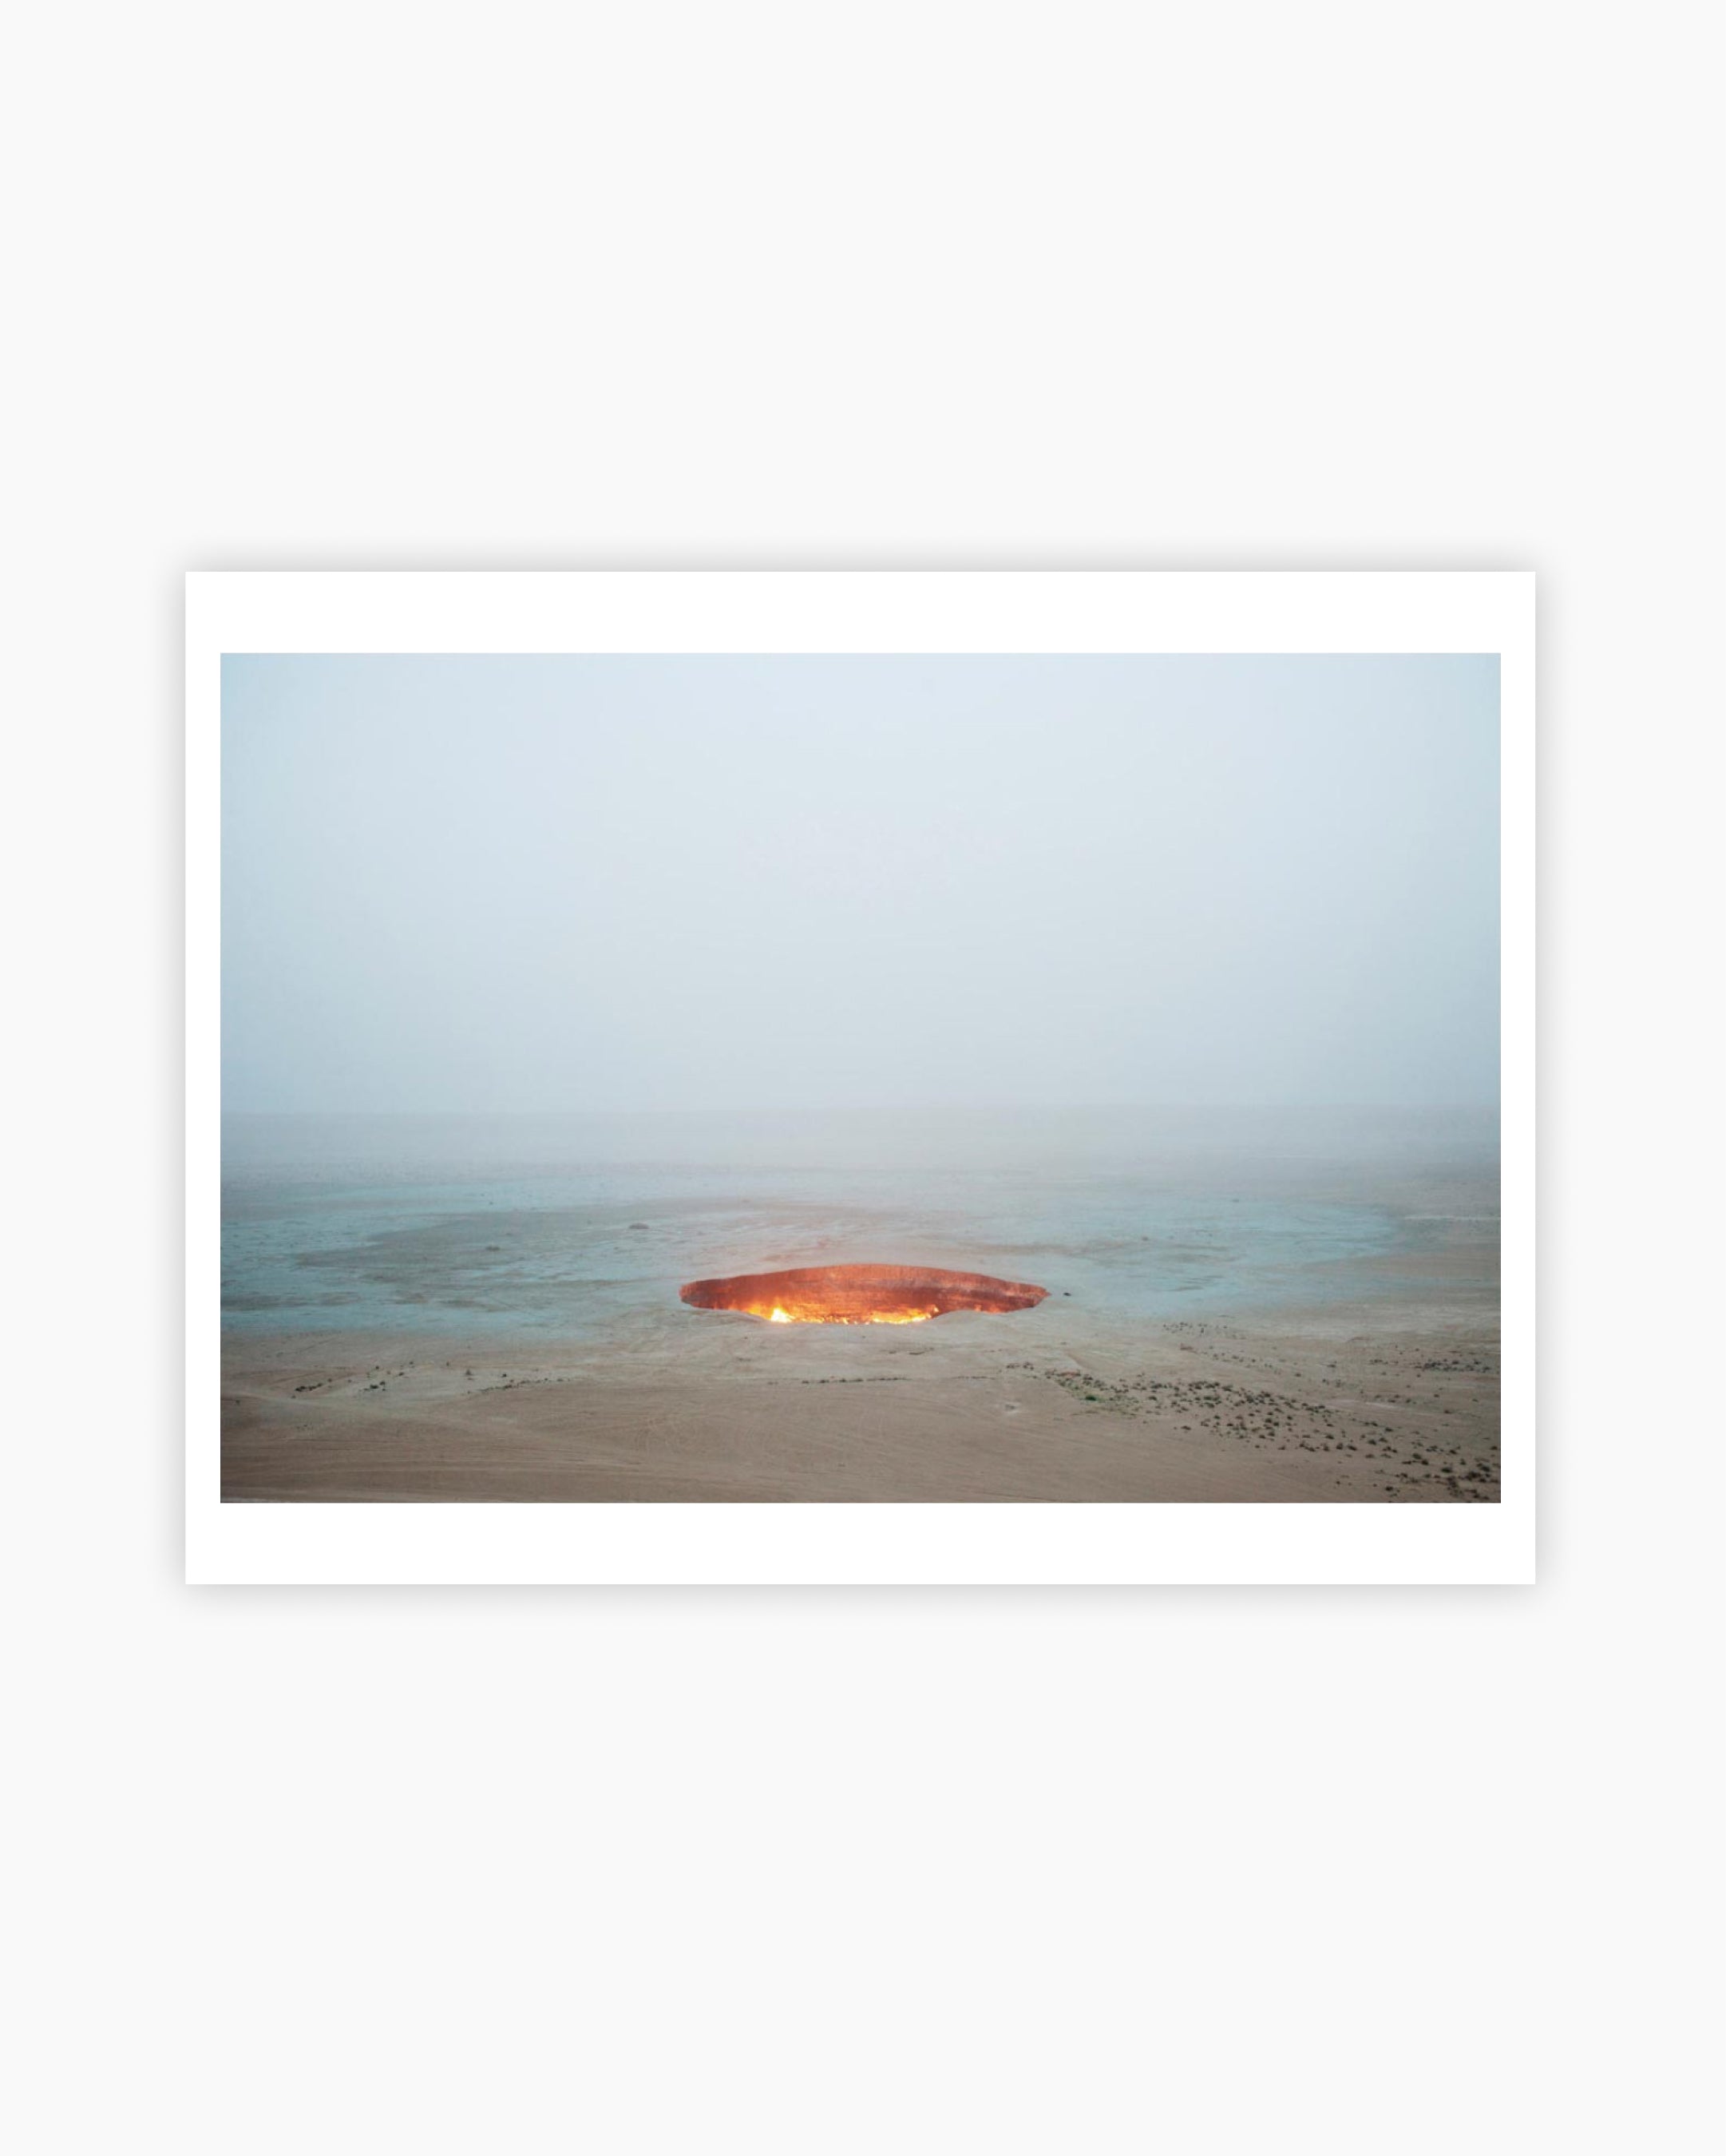 Magnum Editions Poster: “The Door to Hell” Darvaza, Turkmenistan. 2009.